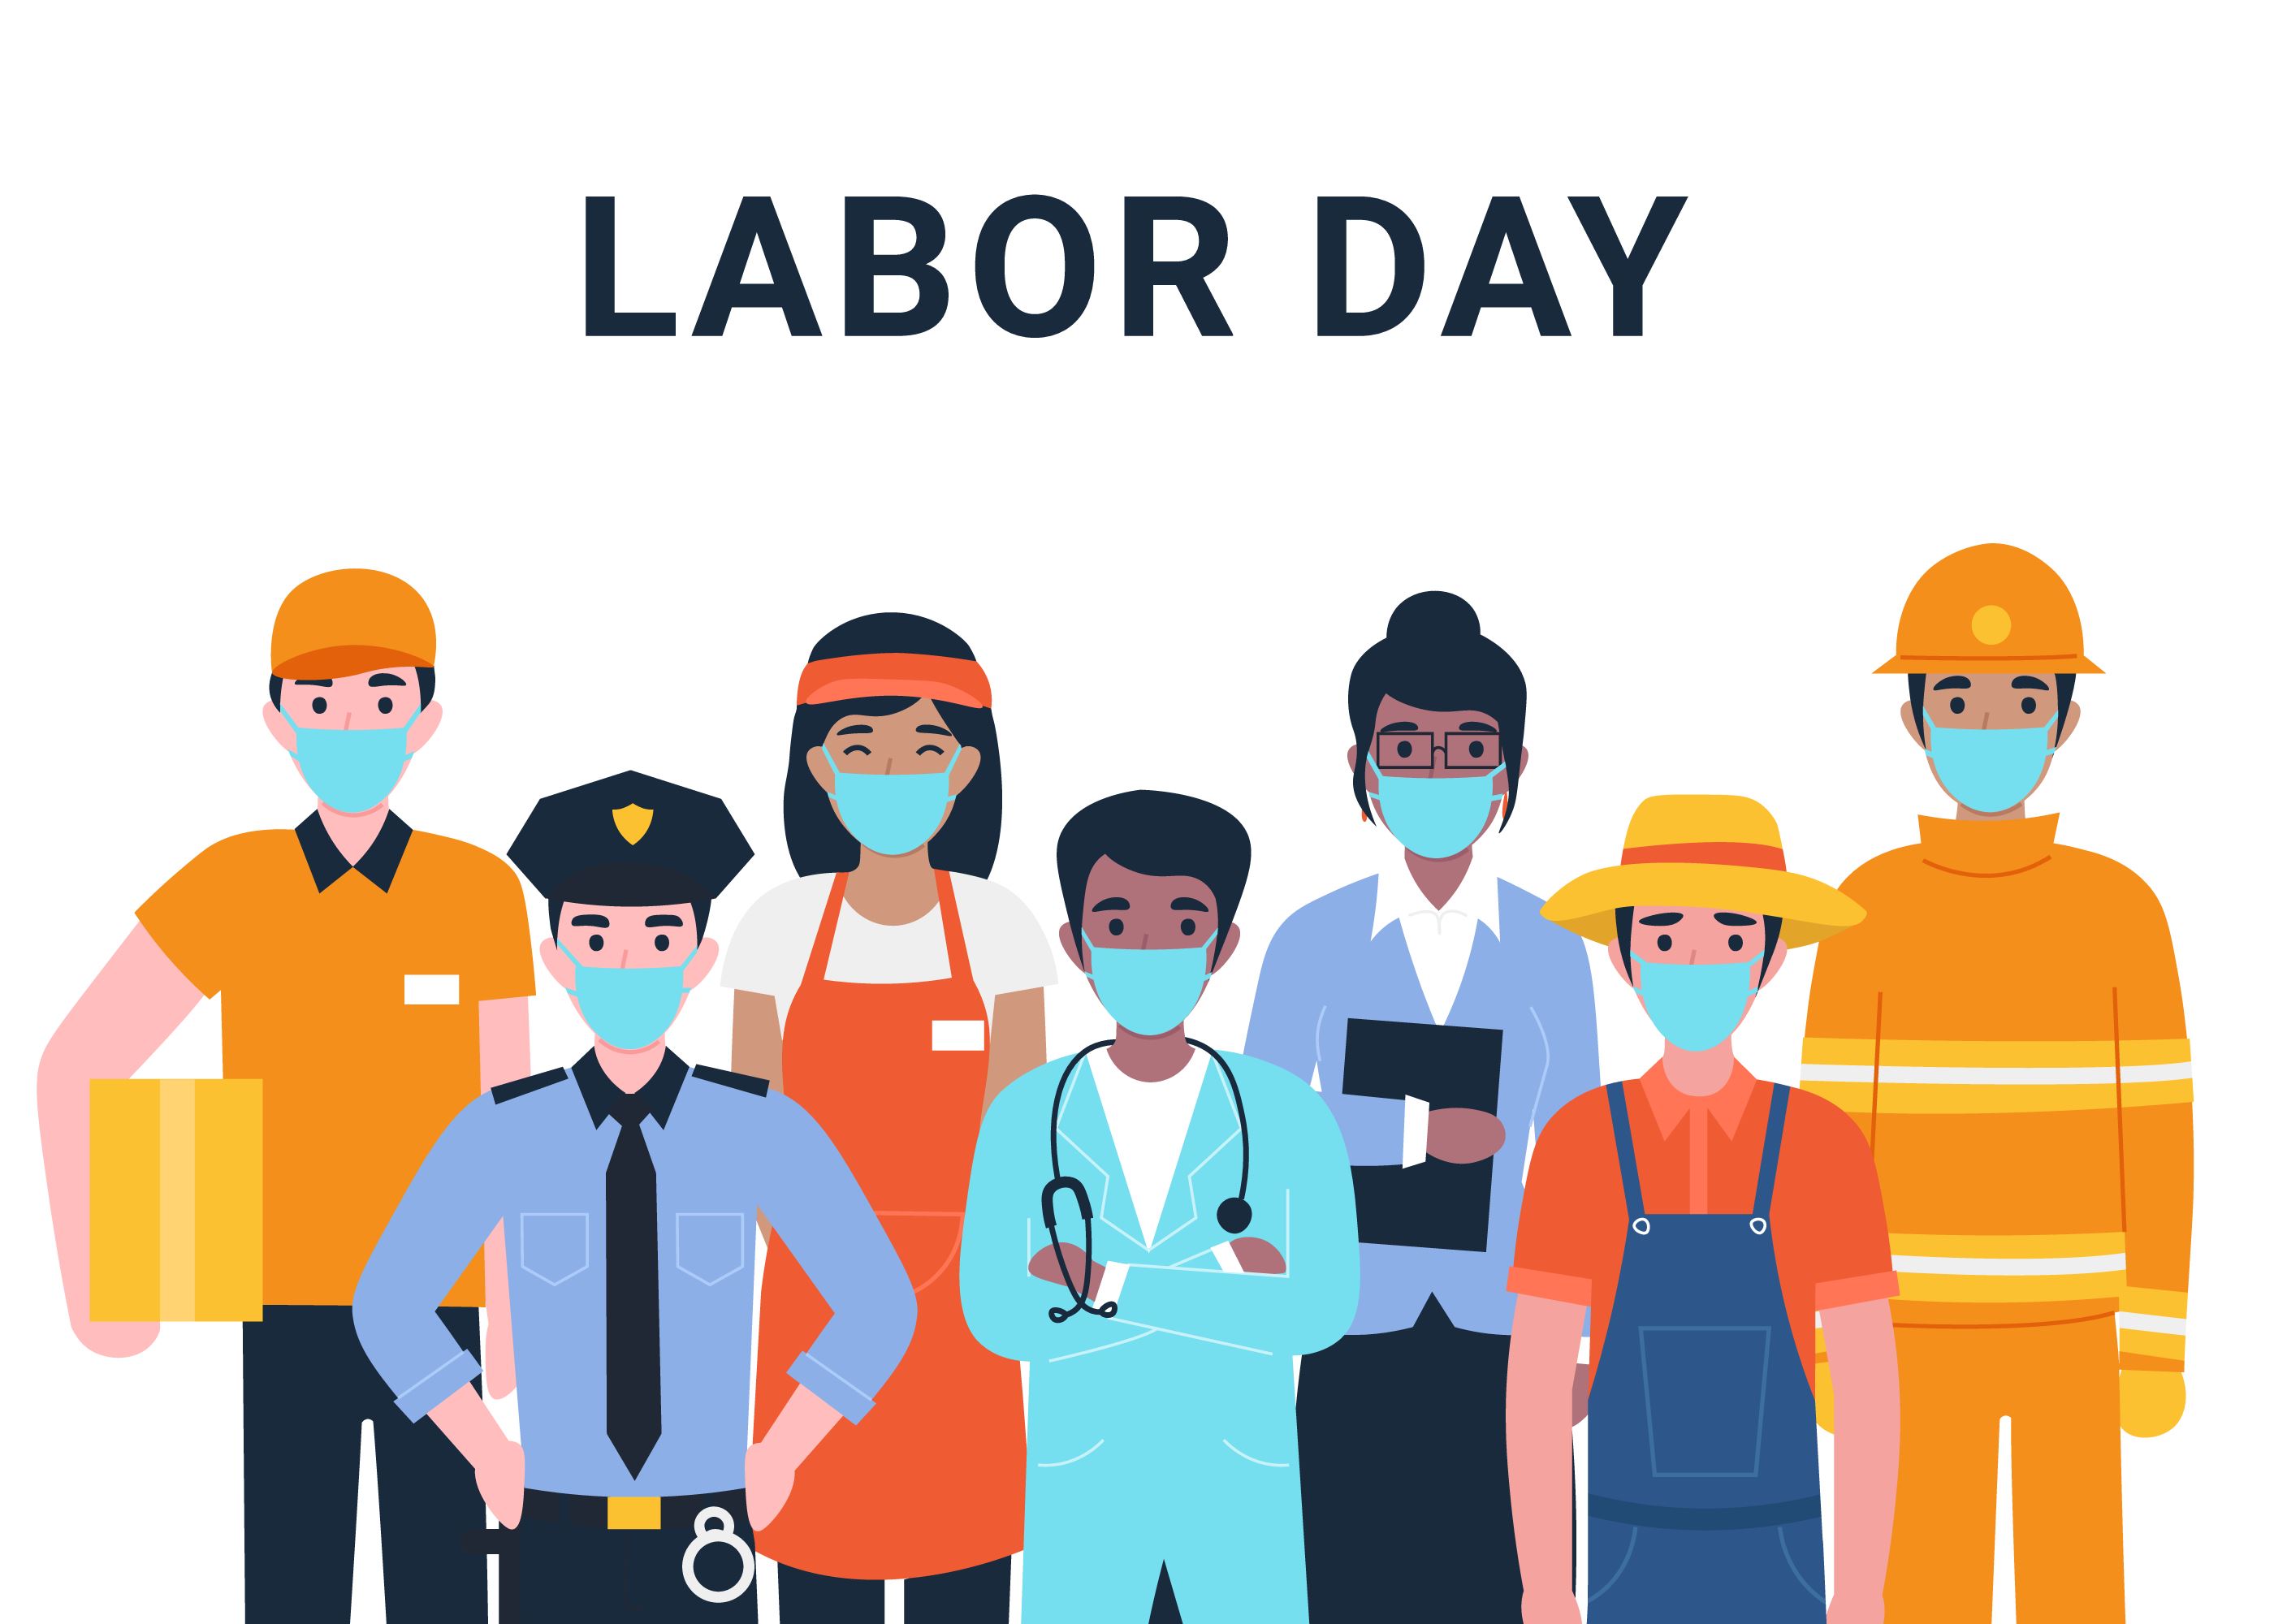 Why We Celebrate Labor Day